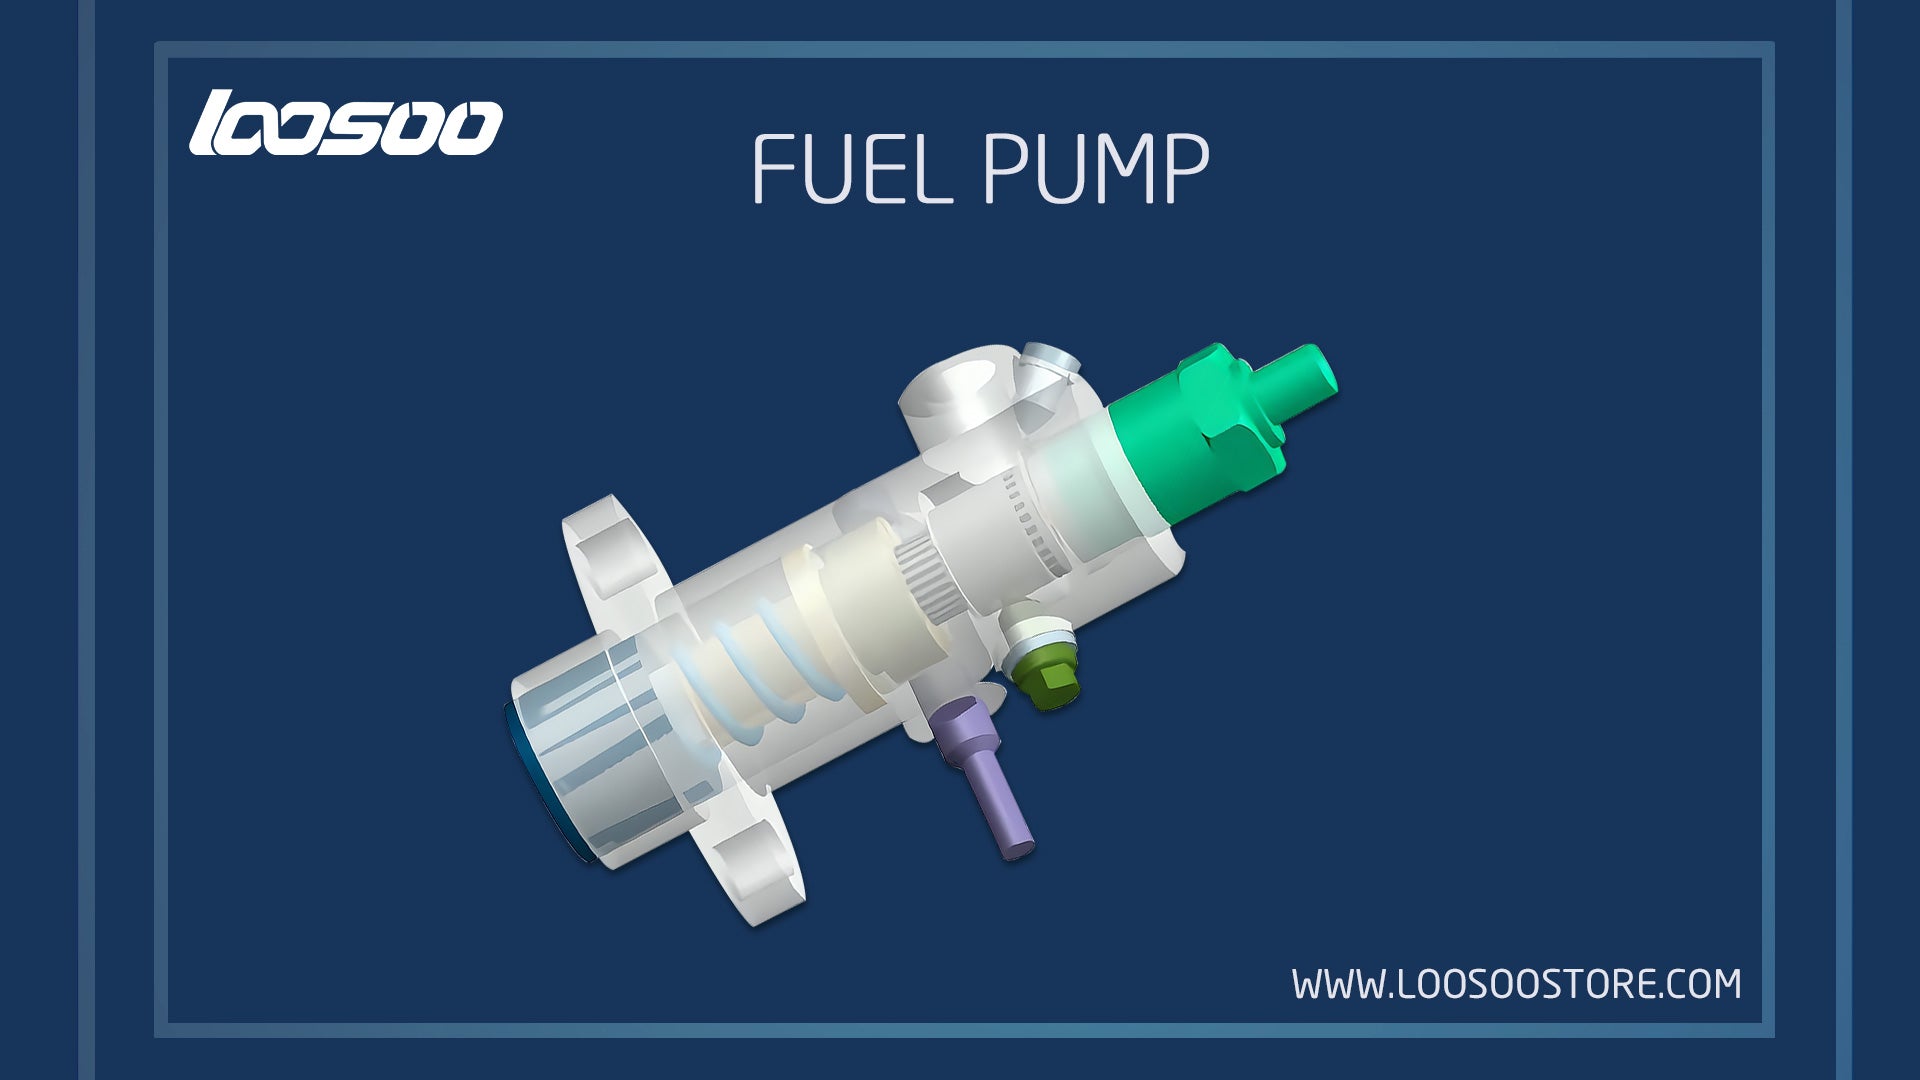 Loosoo fuel injectors Internal seal rings protected from fuel exposure, so can longer-lasting fuel injectors durability, meets OEM standards, 100% tested in the warehouse before shipping.